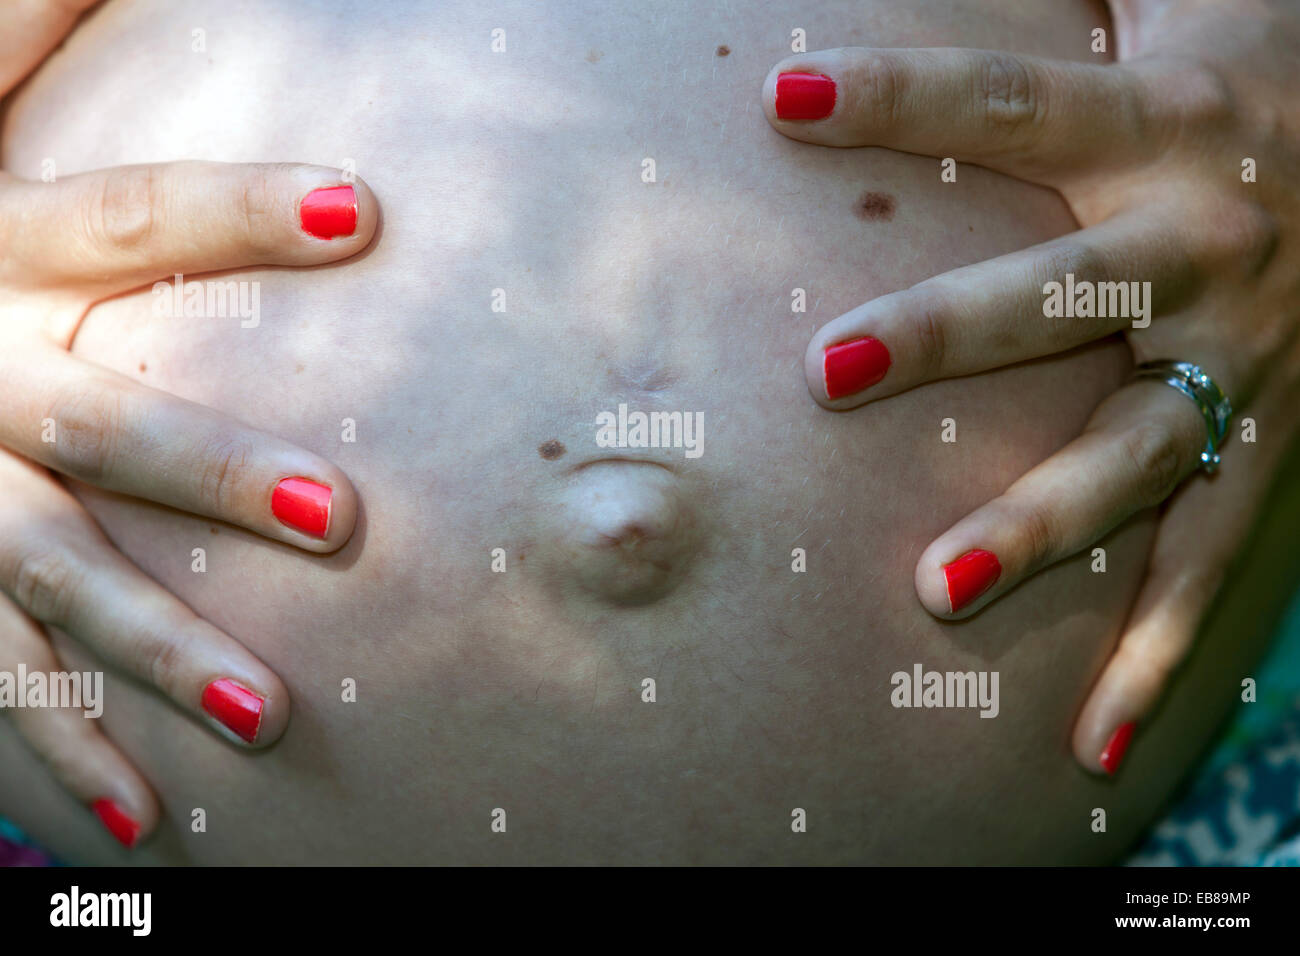 Pregnant woman belly, toes painted red nails, pregnant belly Stock Photo